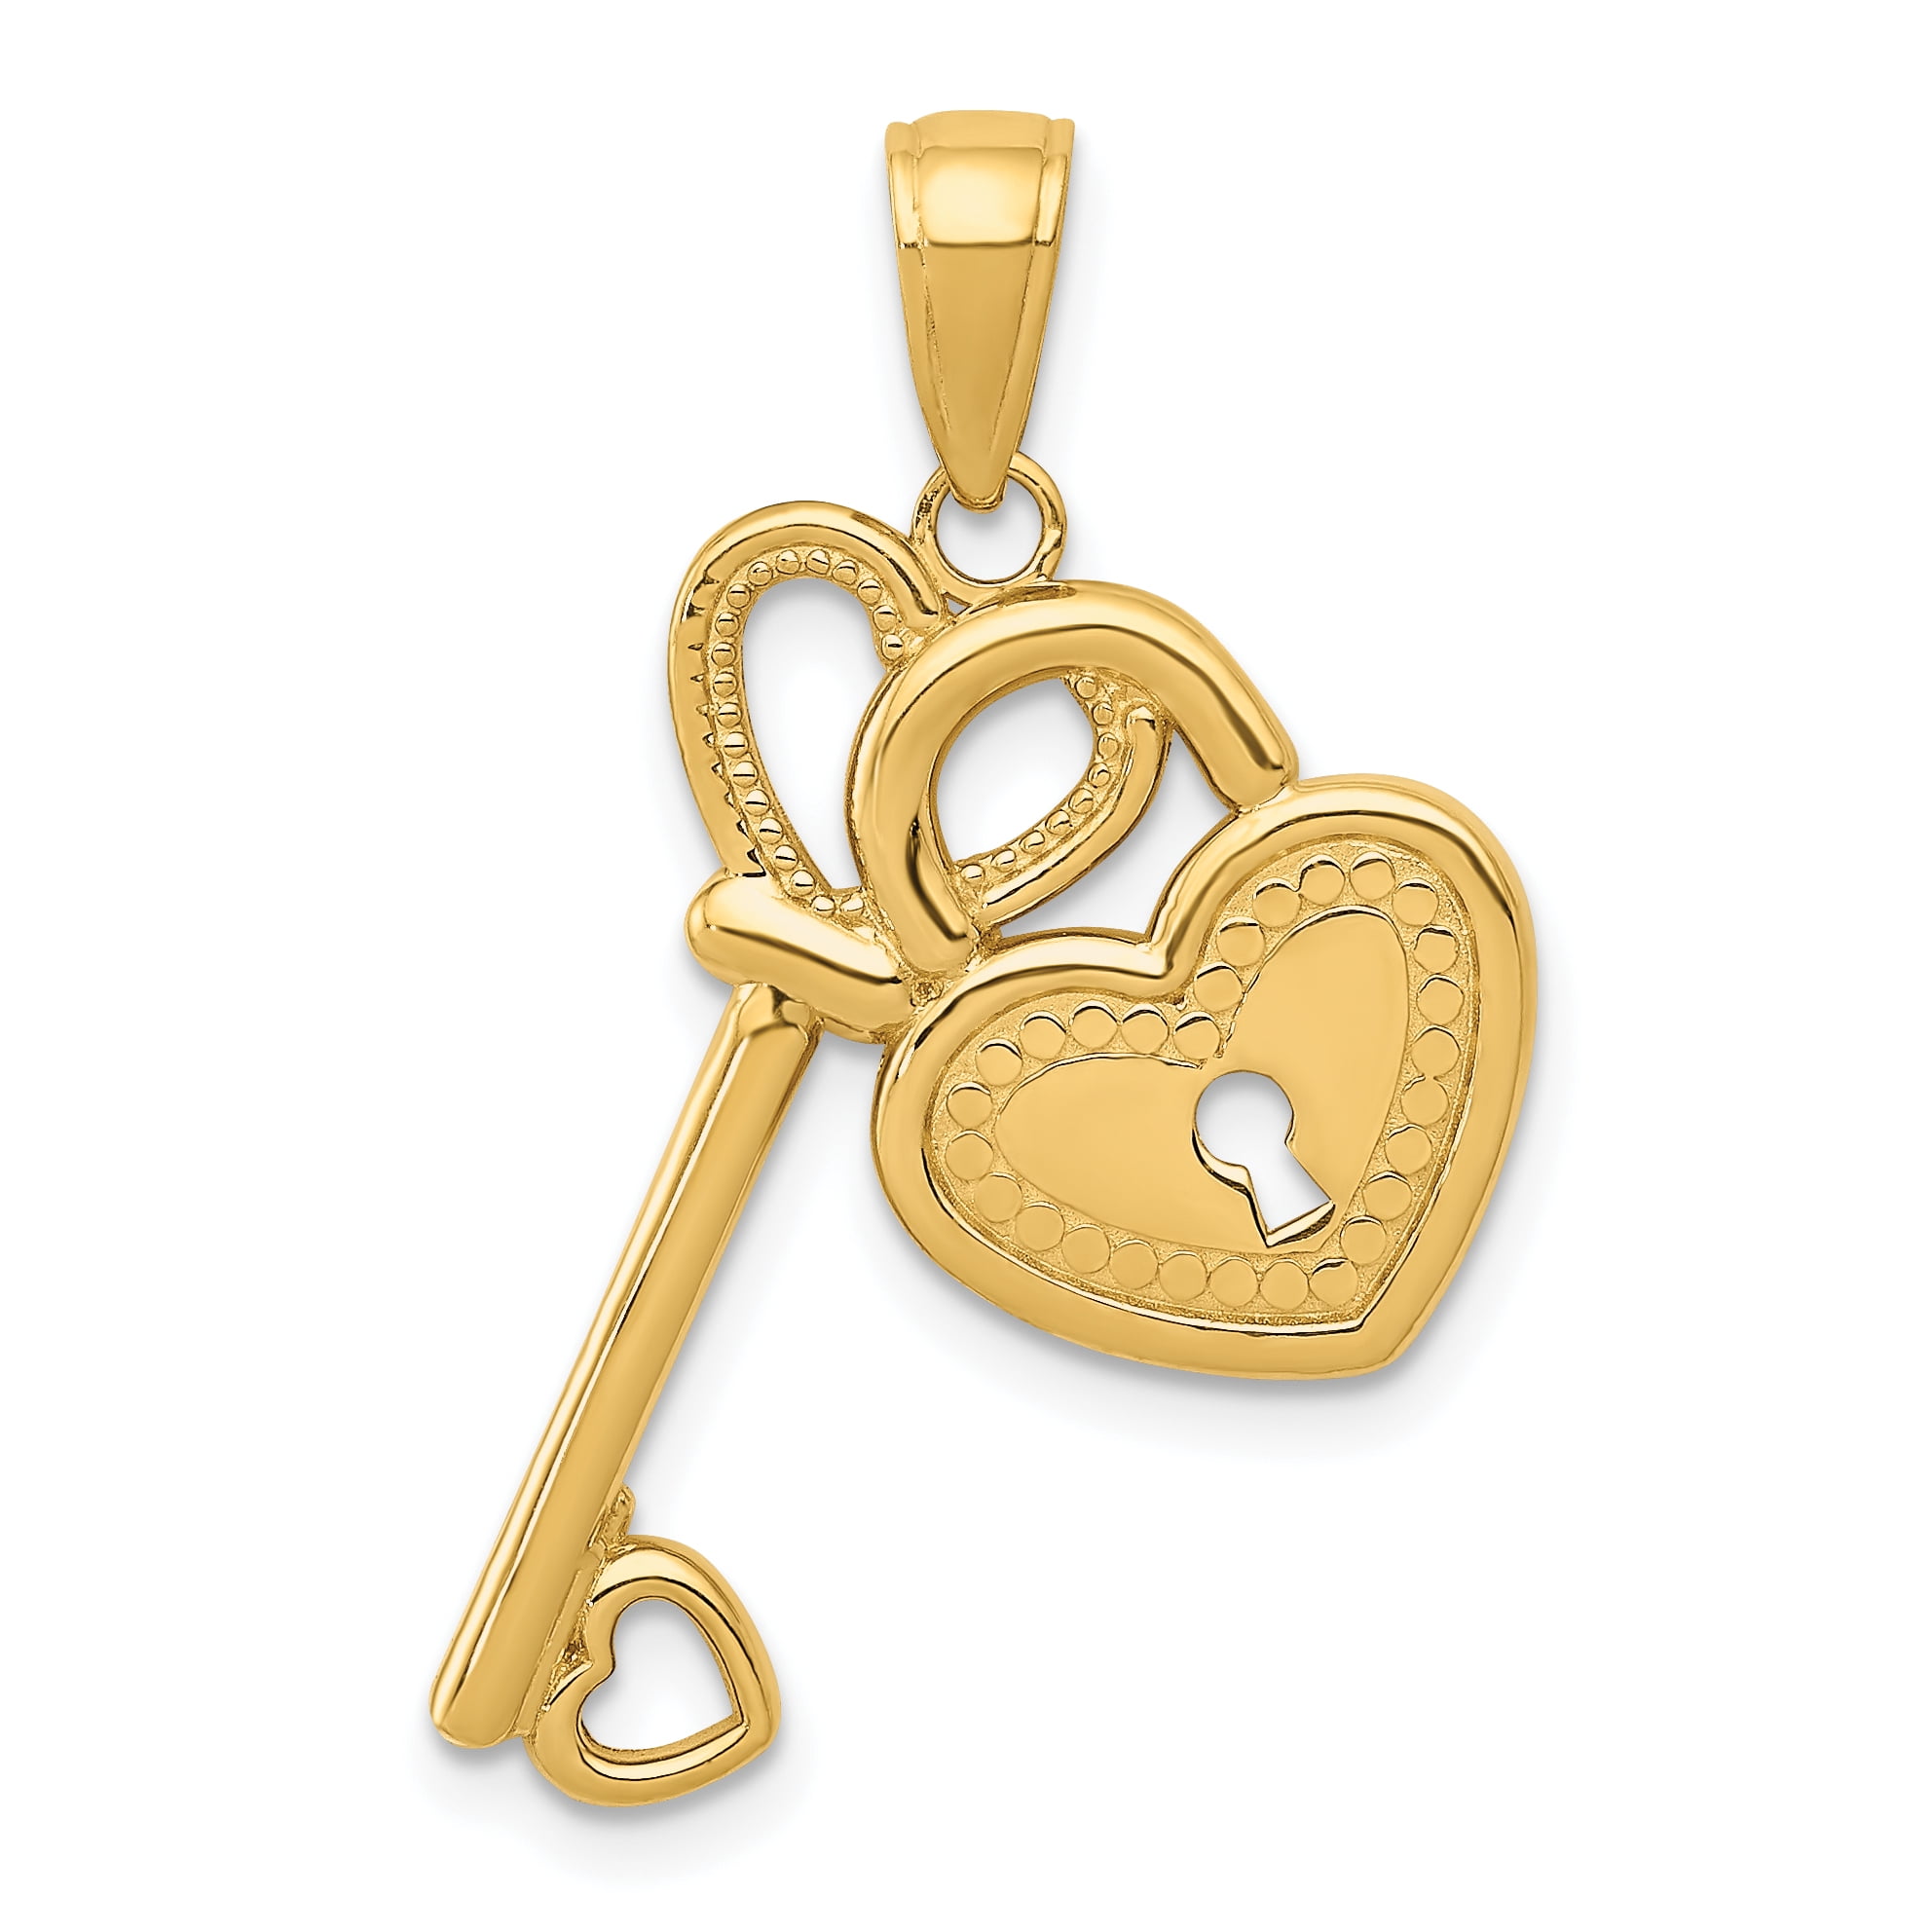 IceCarats - 14kt Yellow Gold Heart Key Lock Pendant Charm Necklace Fine Jewelry Ideal Gifts For ...